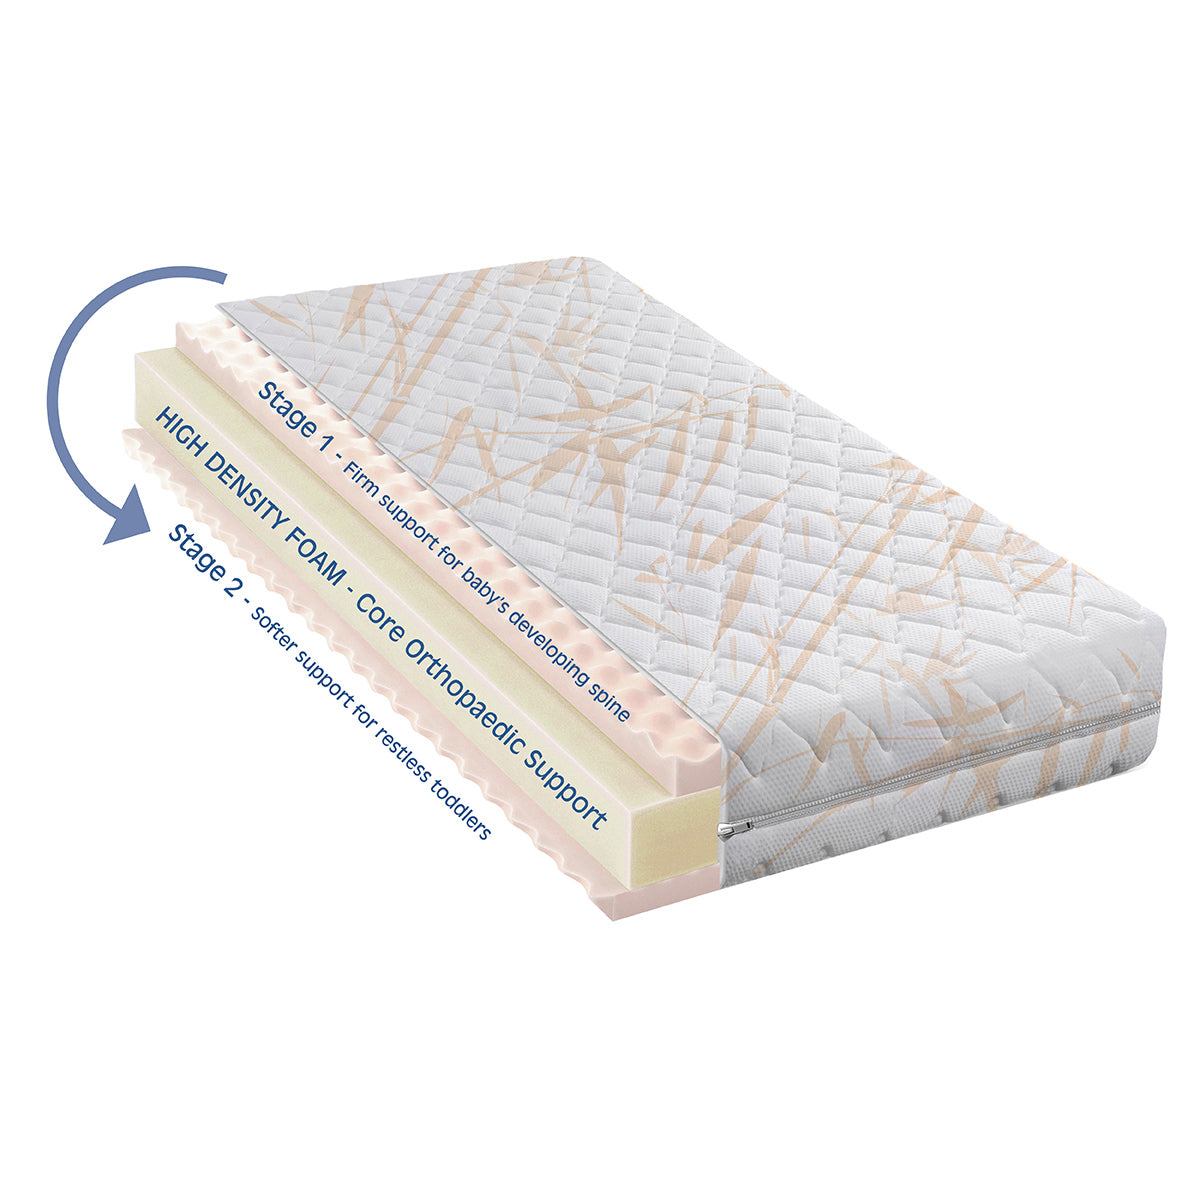 Snuggletime Bamboo 2 Stage Orthopaedic Support Mattress